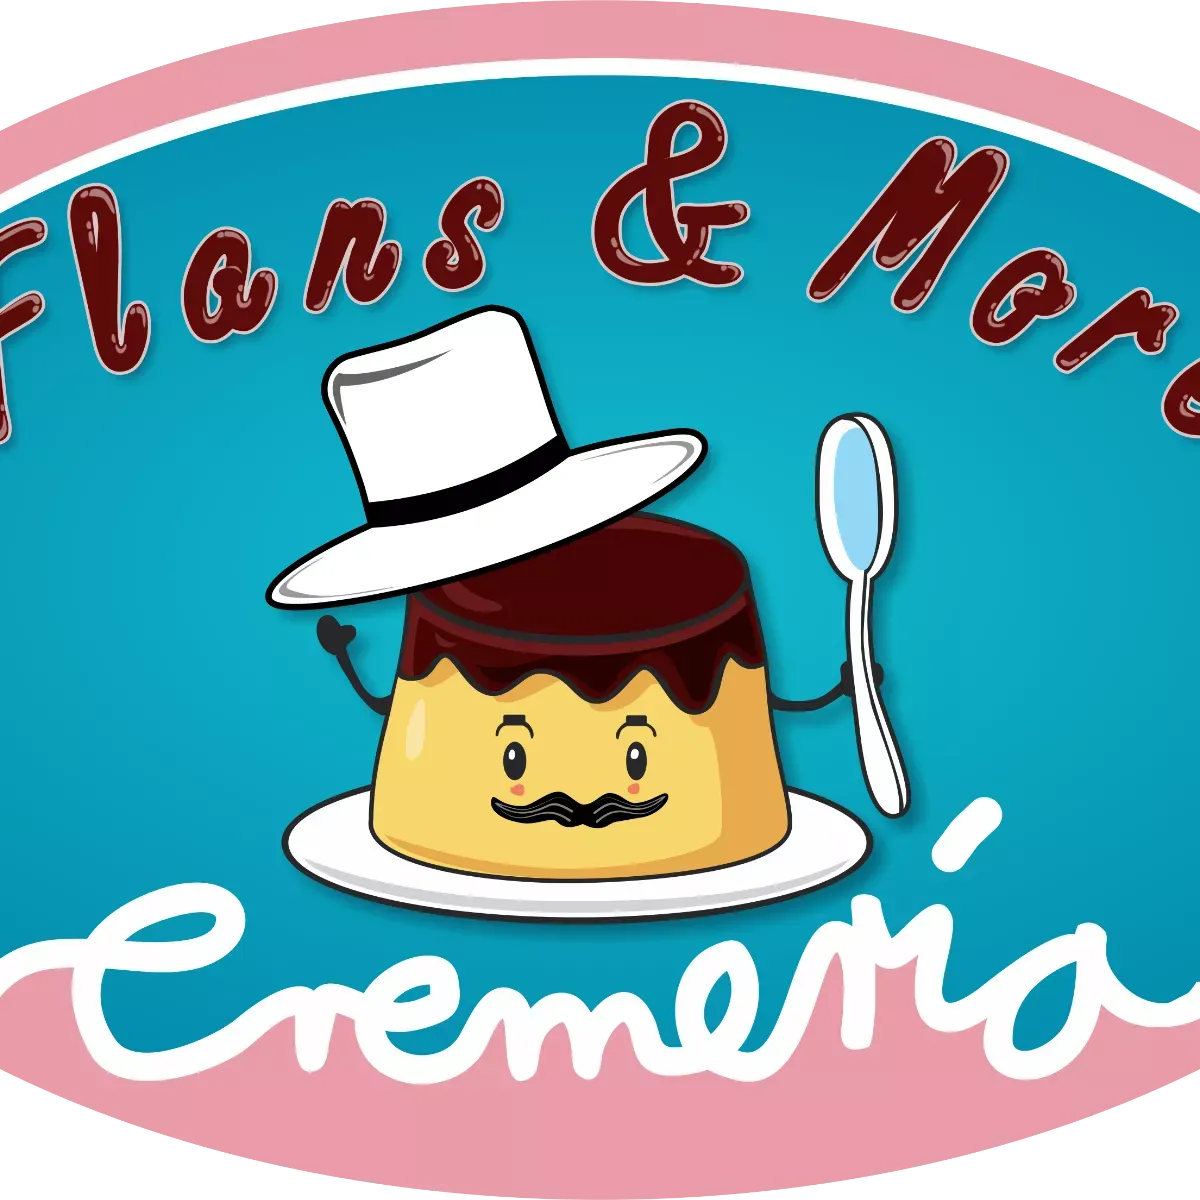 Flans and more